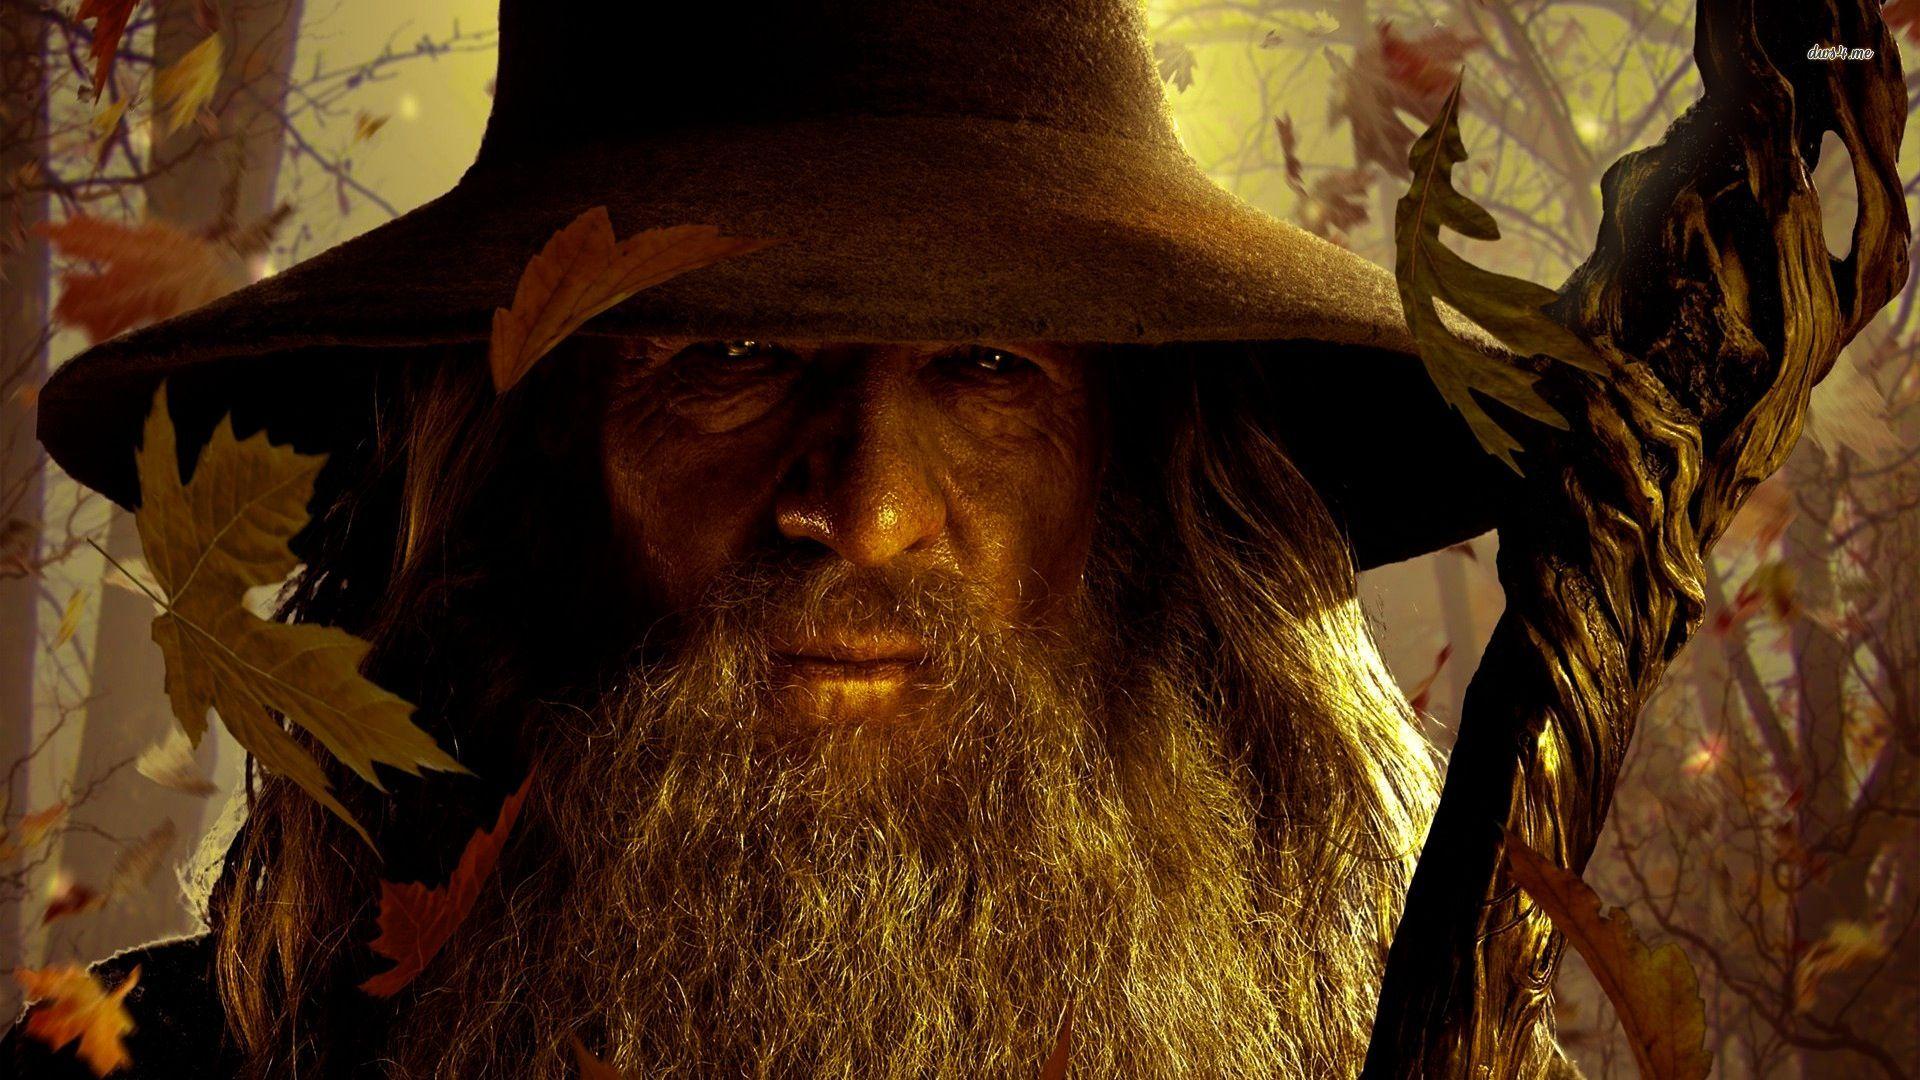 Gandalf The Lord Of The Rings 12 HD Wallpaper. Movies and TV Shows